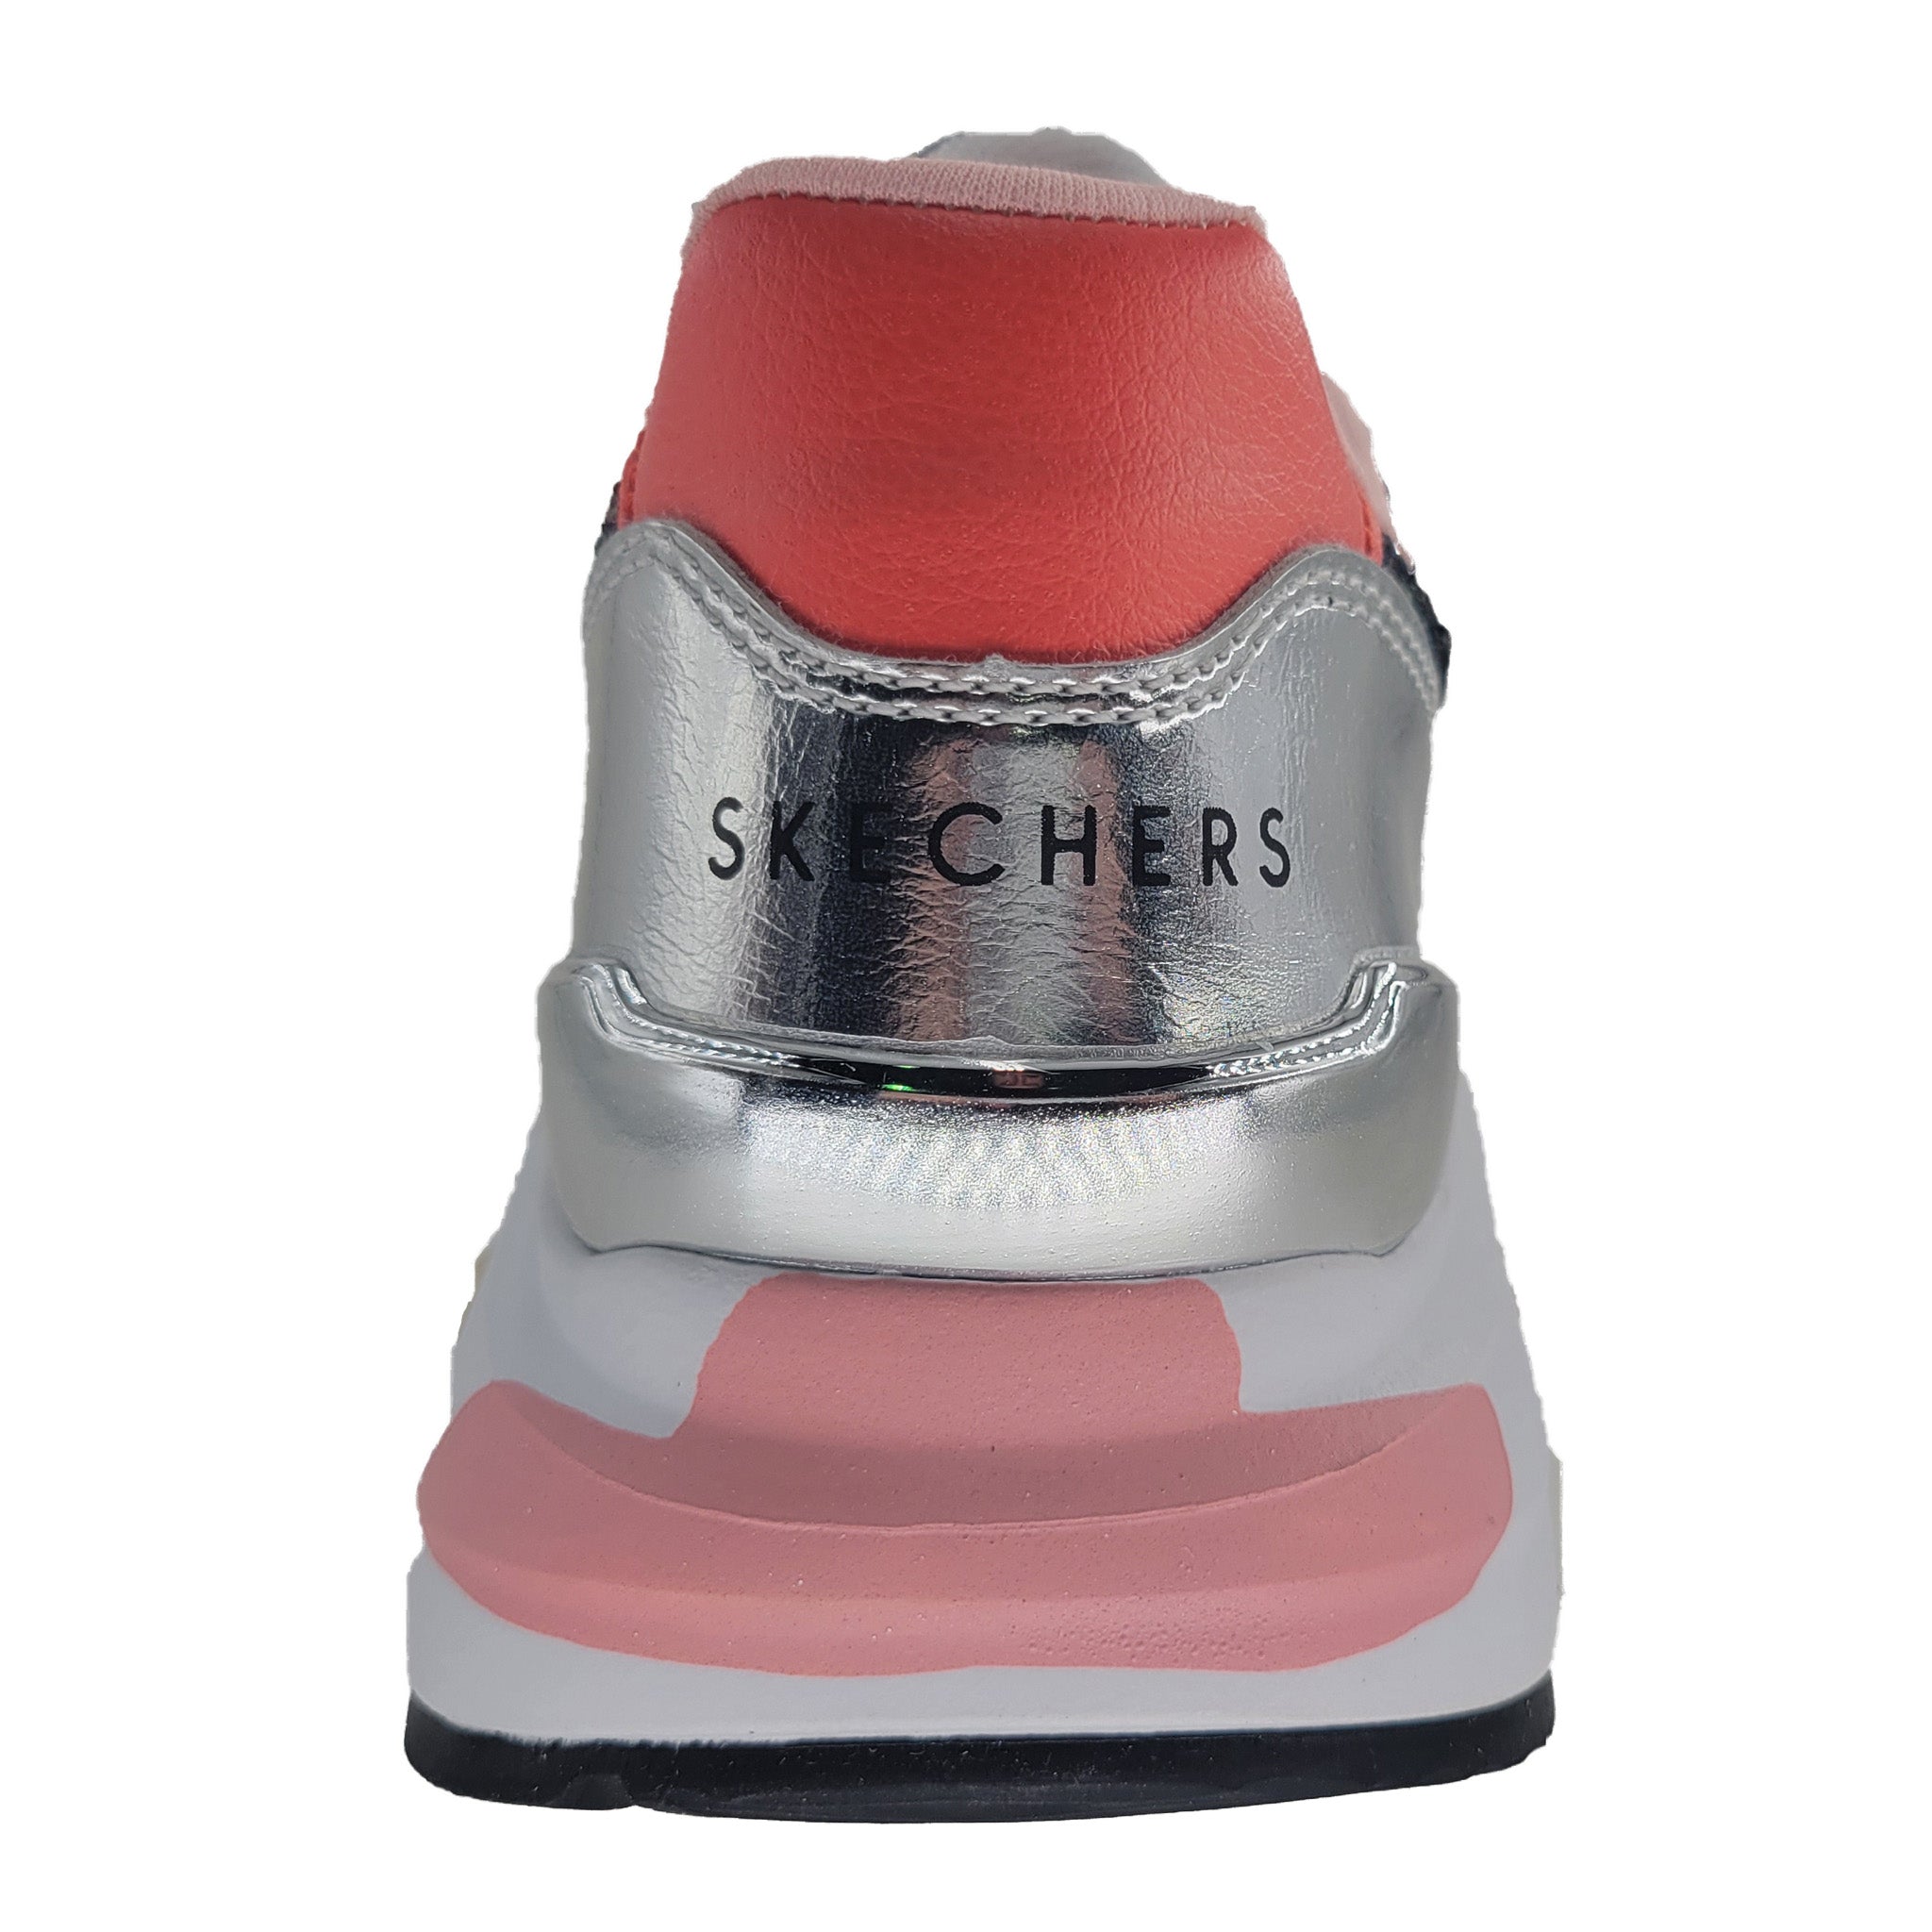 Skechers Women's 155465 Rovina Star Shoeters Casual Shoes – That 